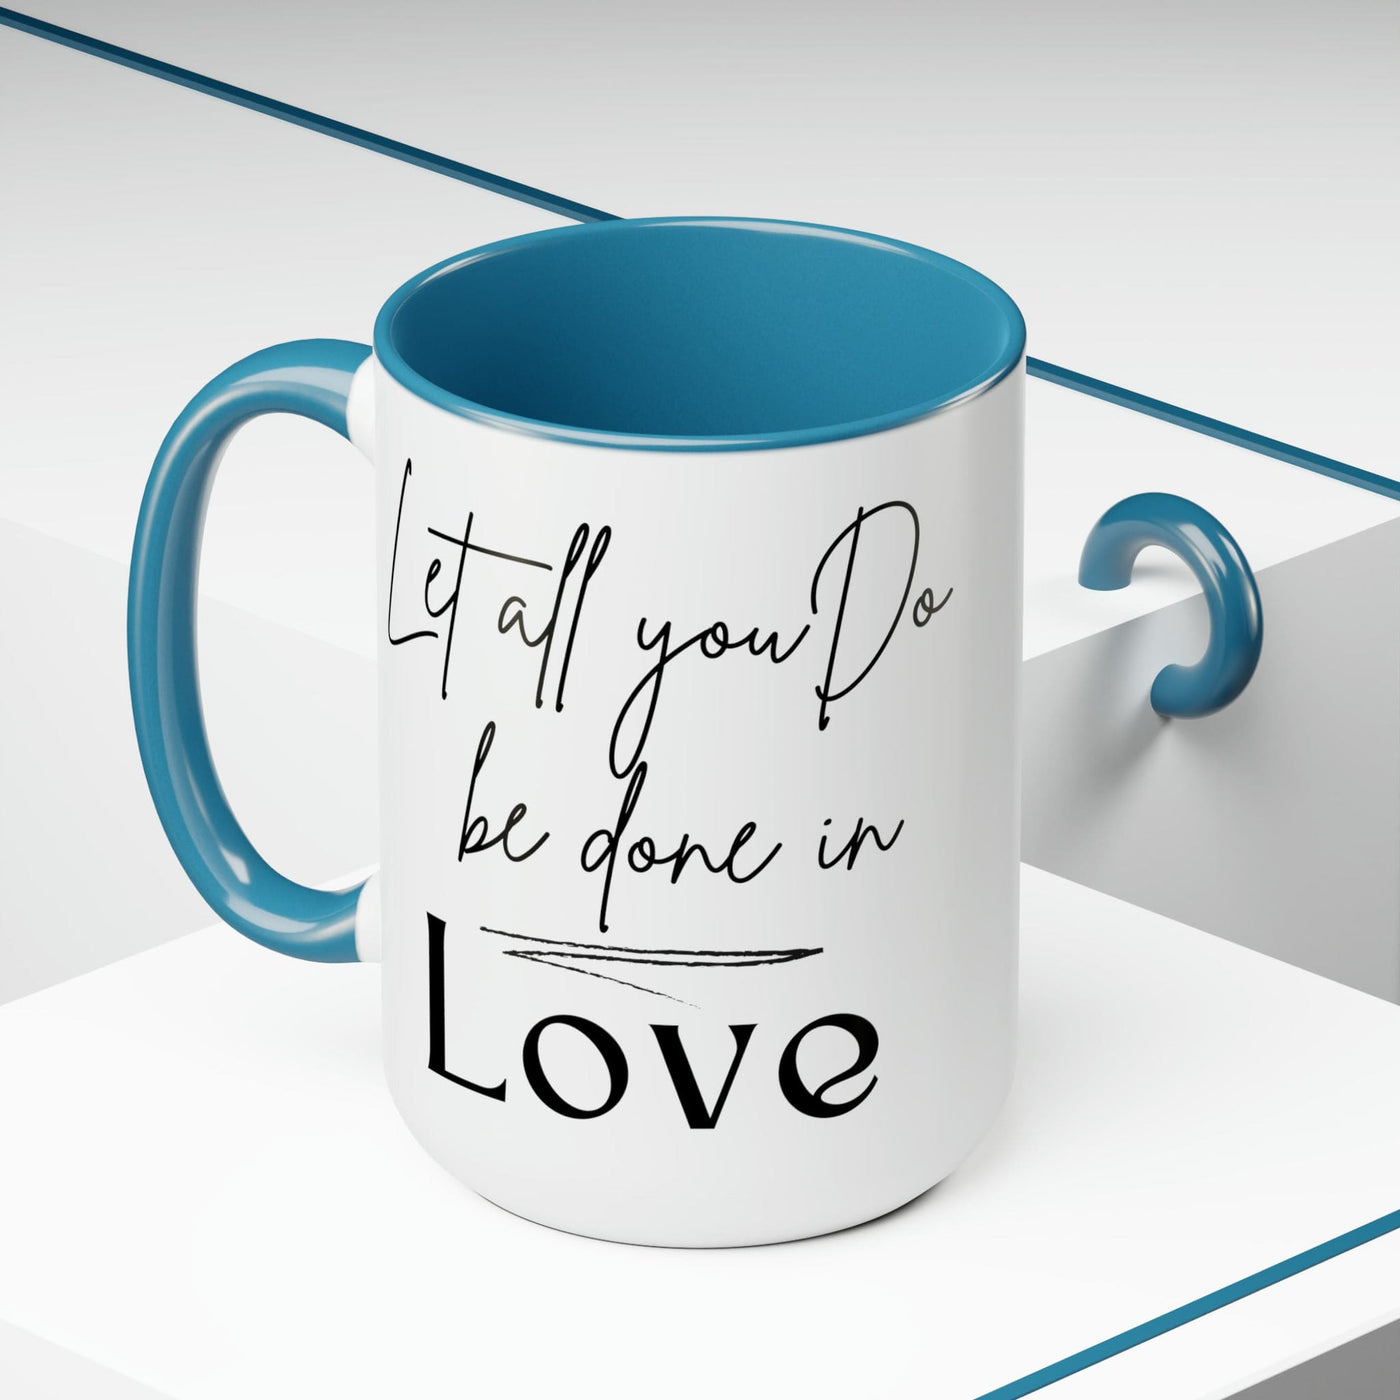 Accent Ceramic Coffee Mug 15oz - Let All You Do Be Done In Love Black